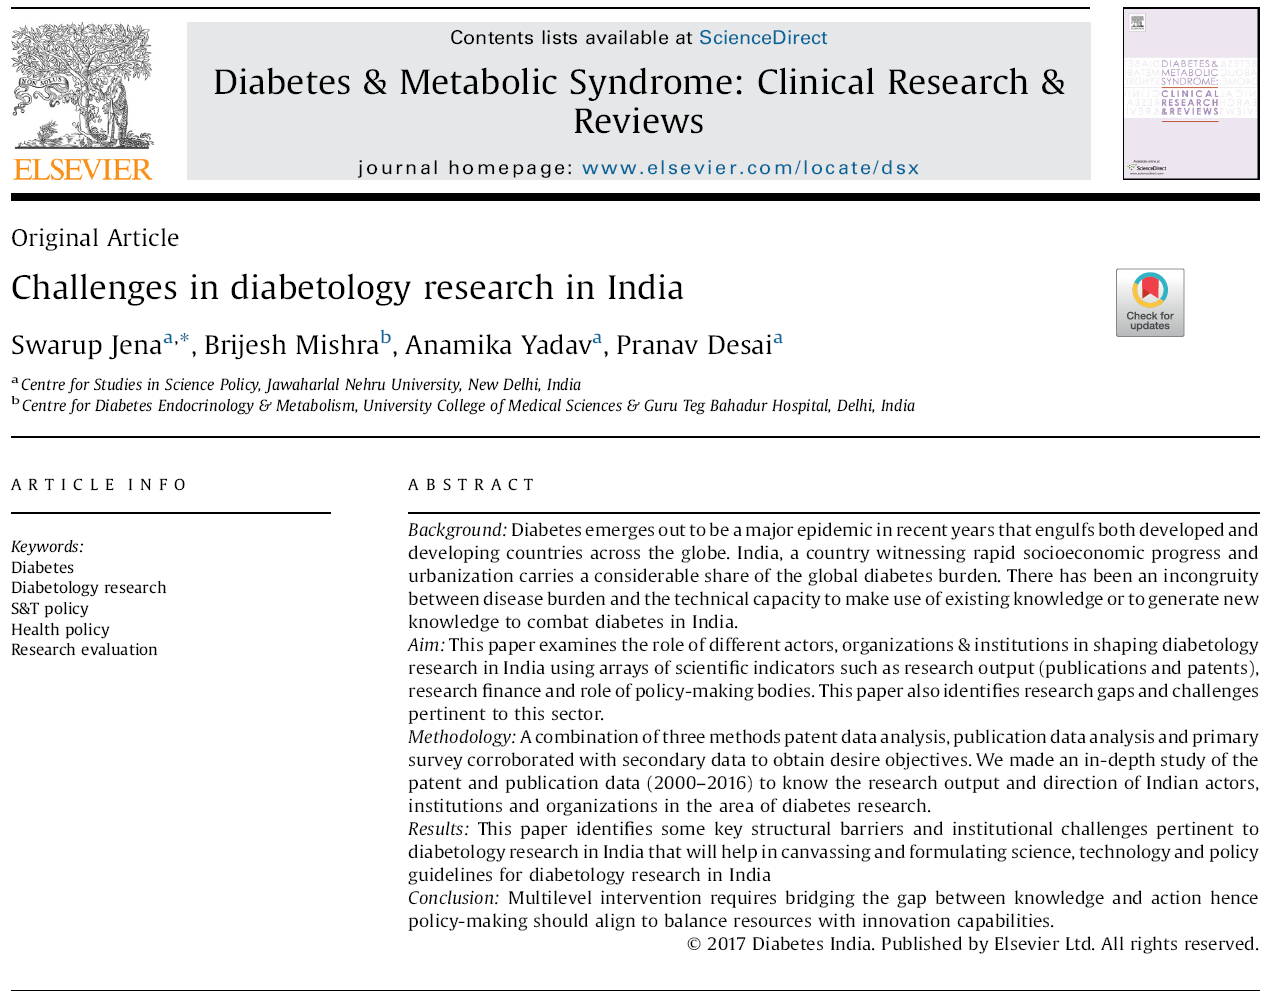 diabetes & metabolic syndrome: clinical research & reviews